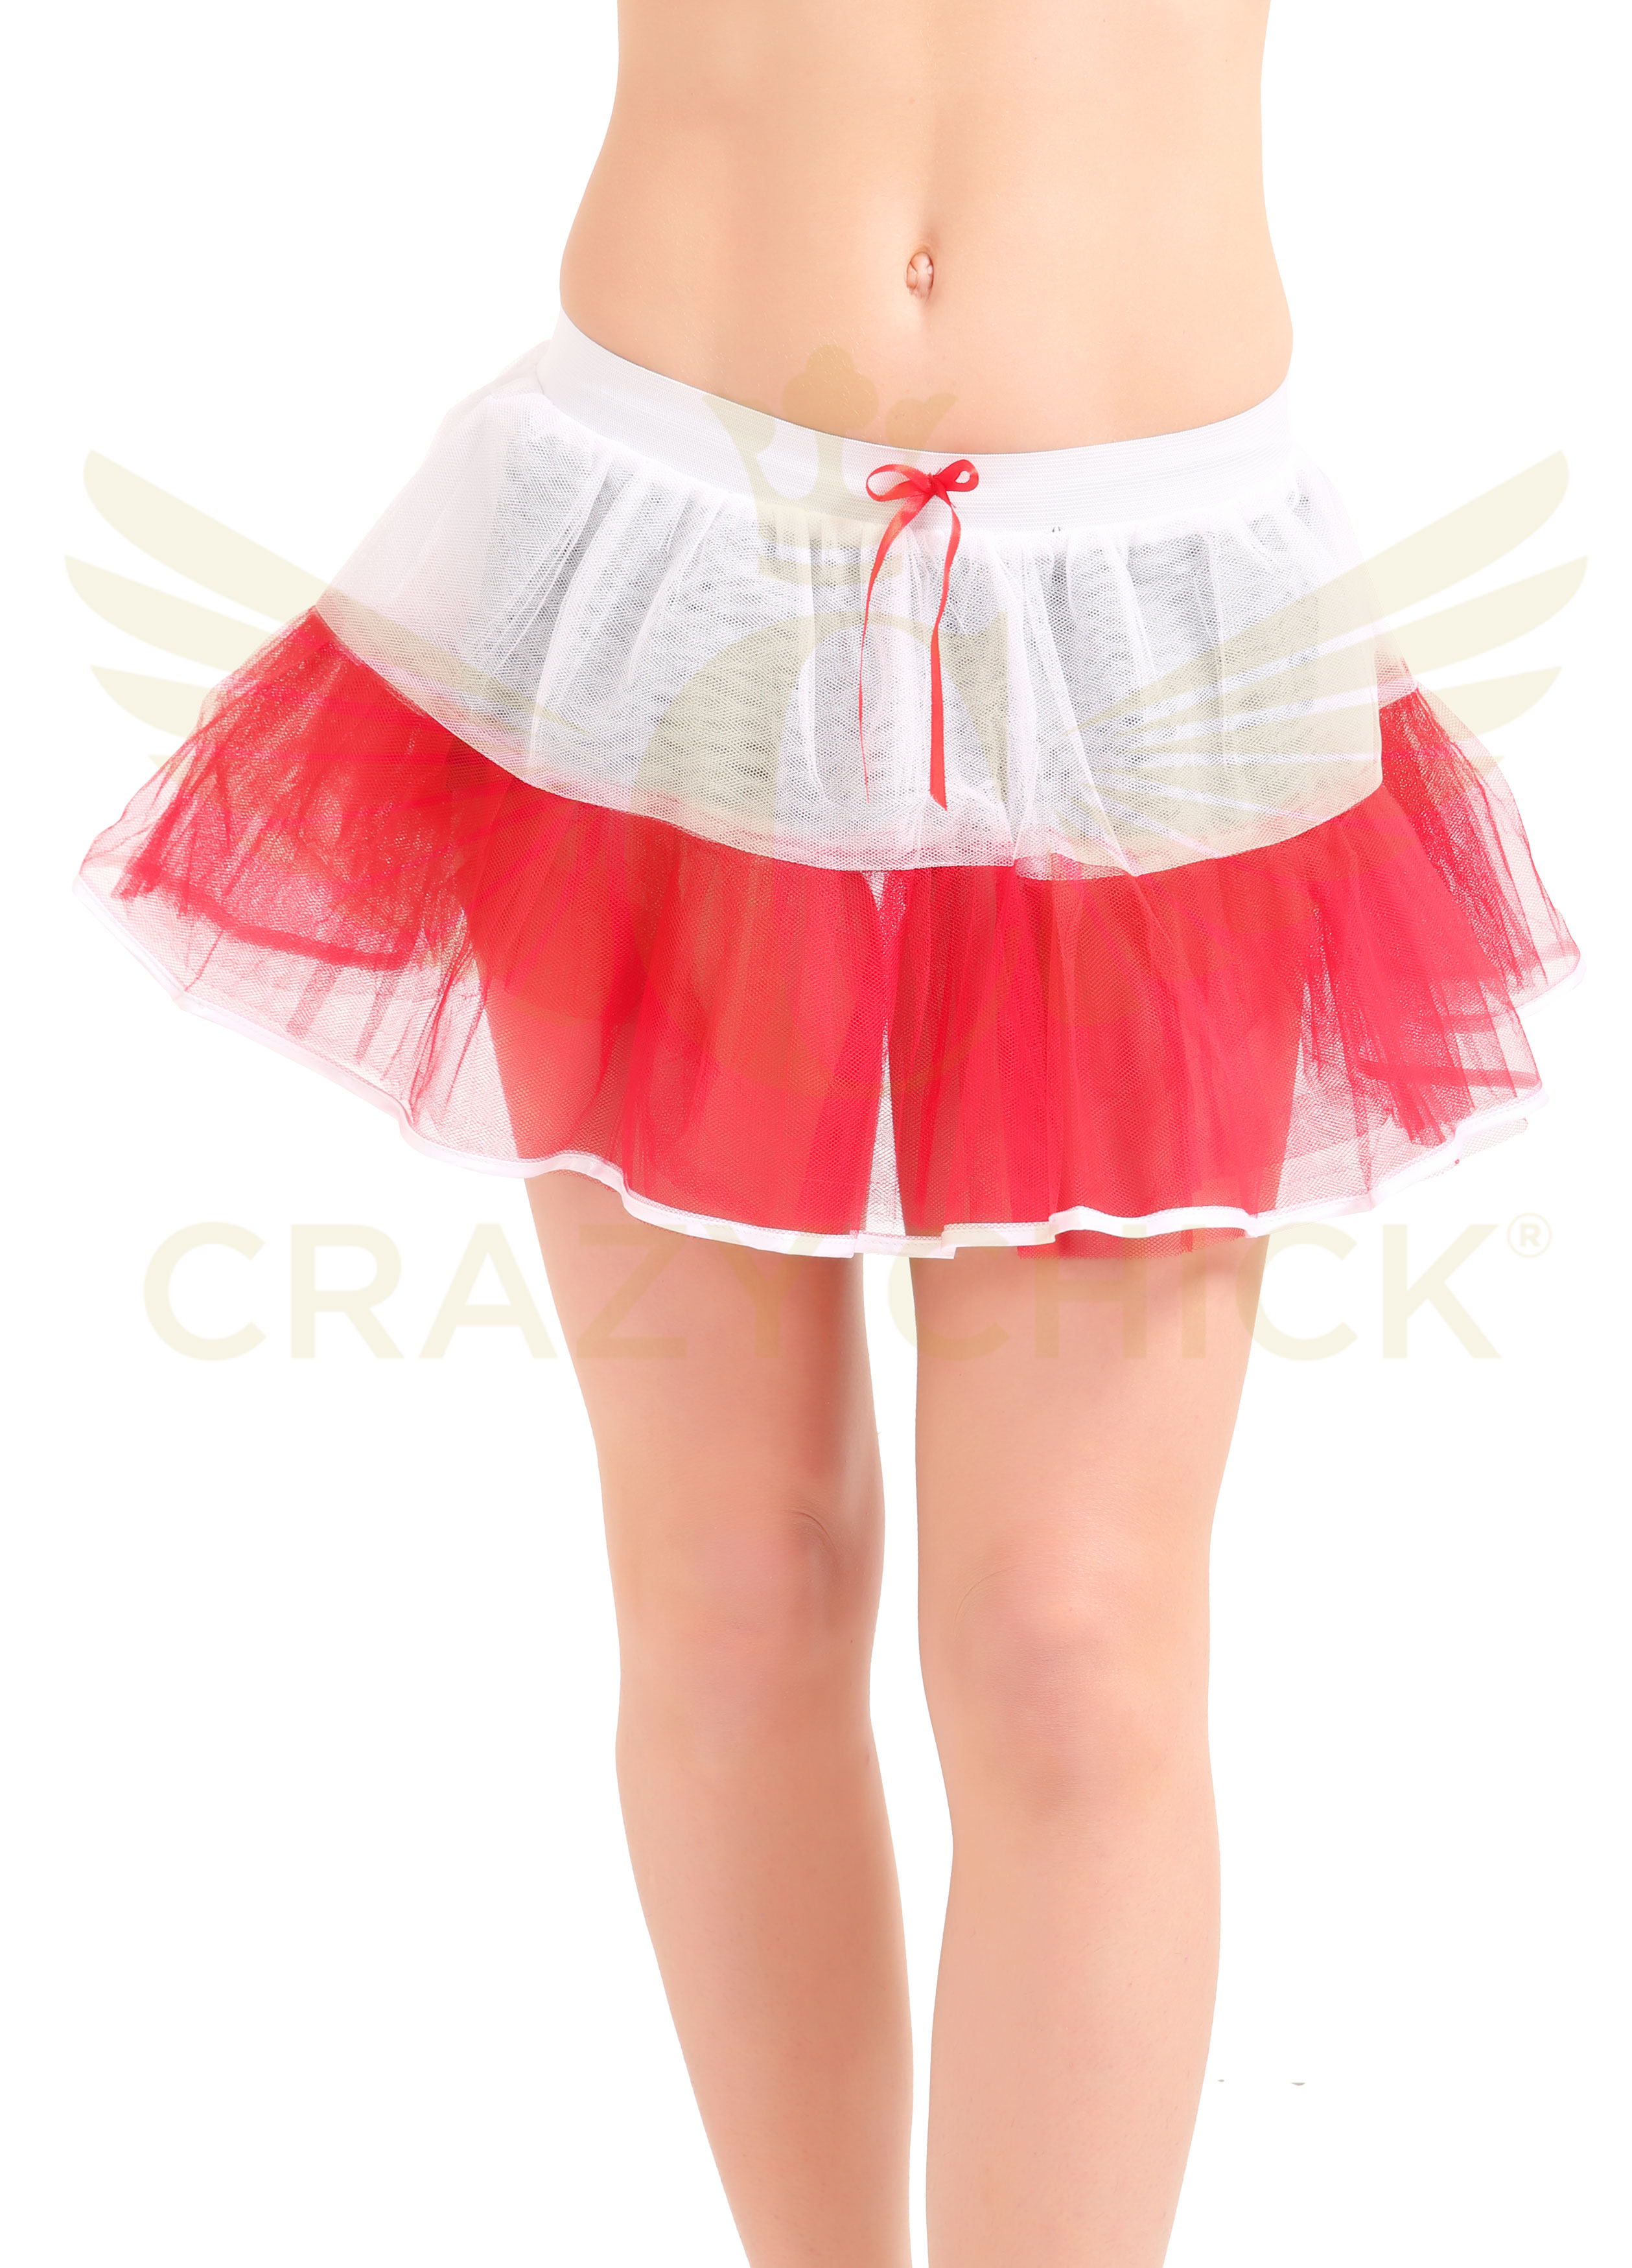 Crazy Chick Adult 4 Layers White Red Tutu Skirt